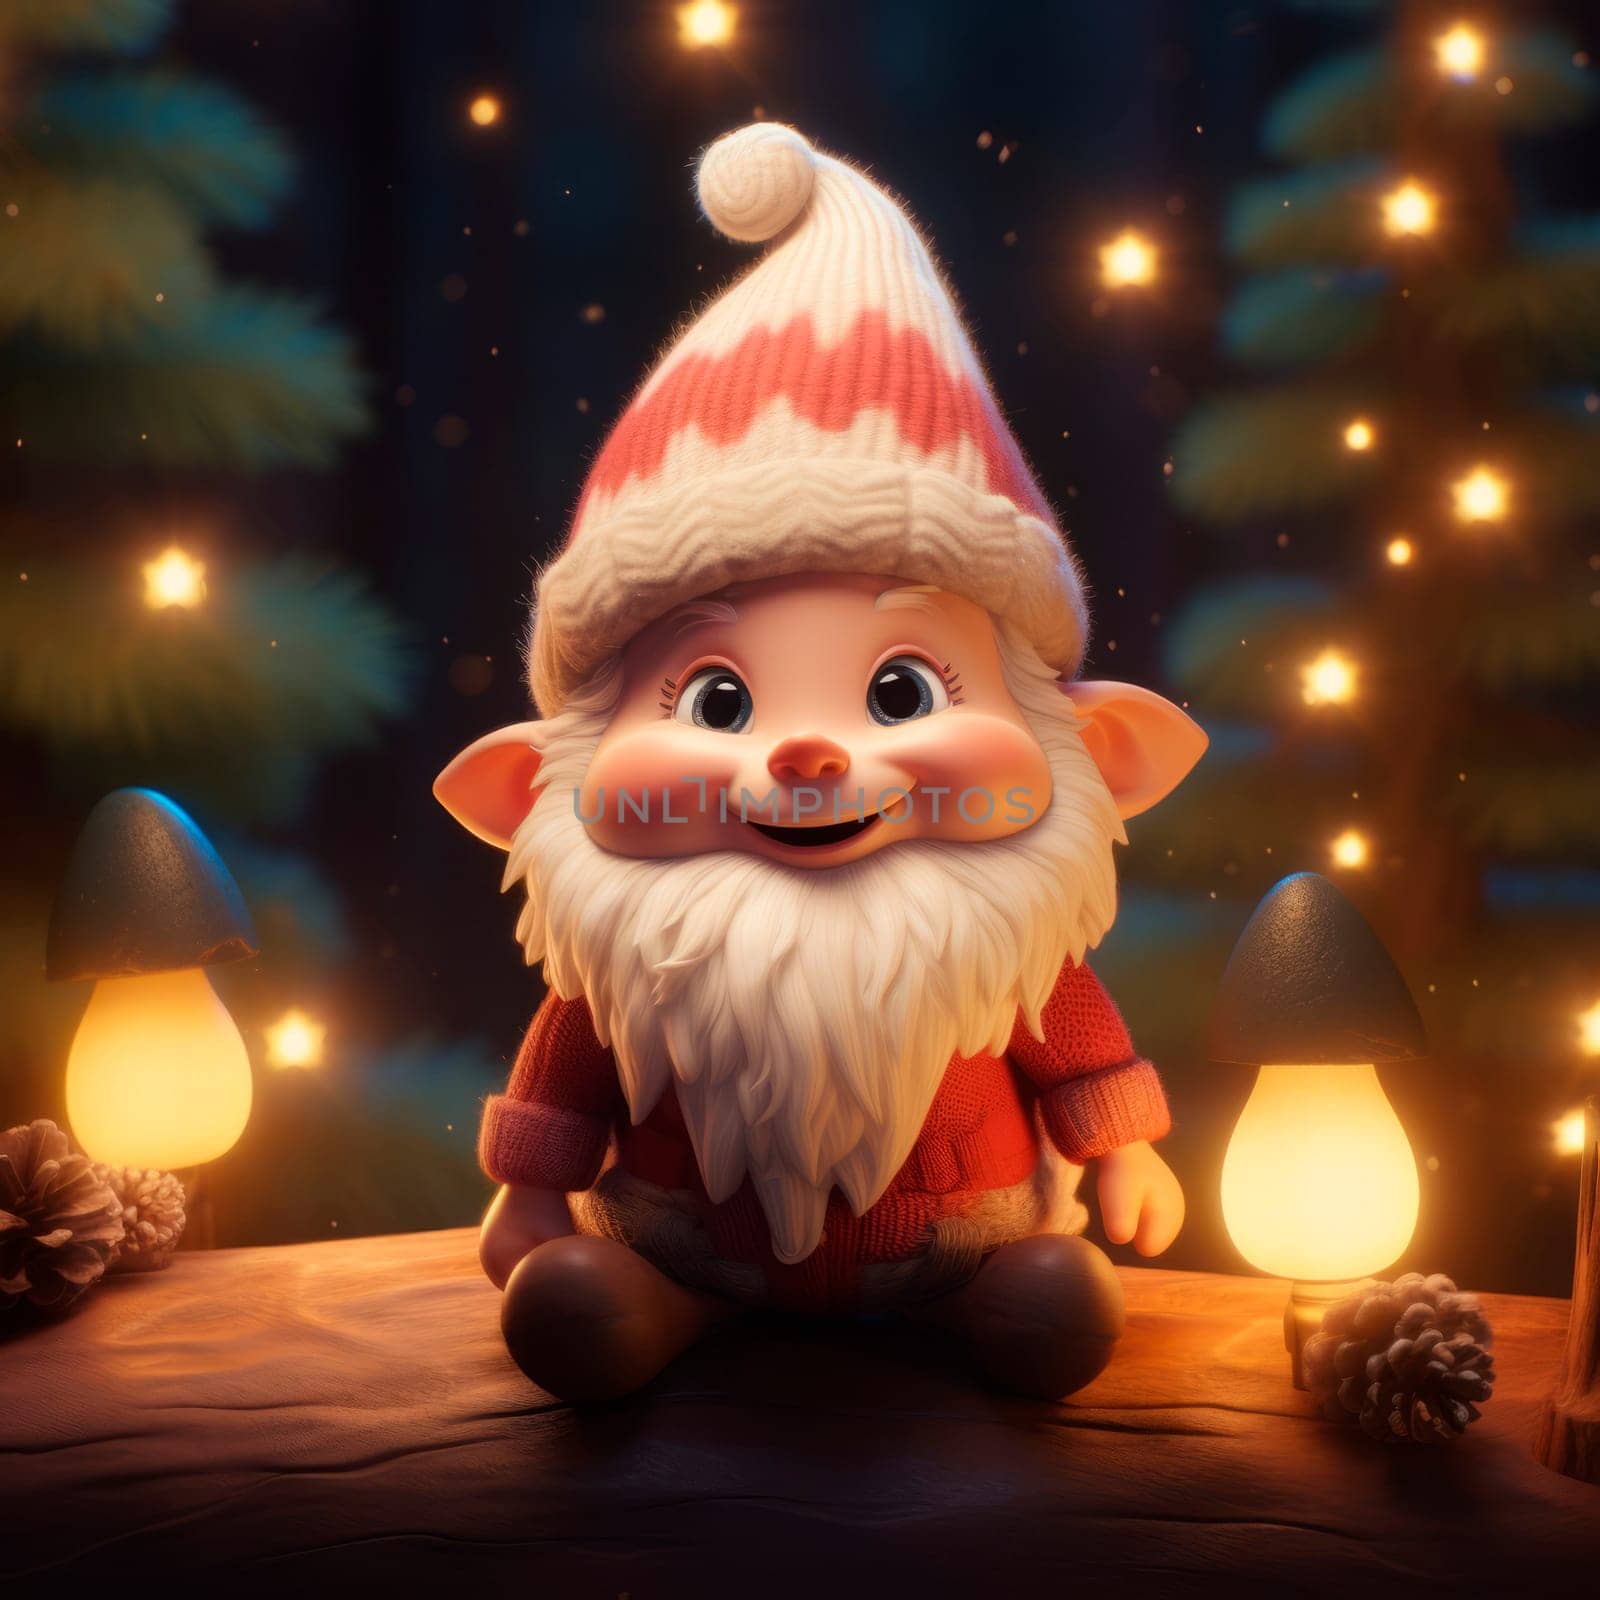 Cute Christmas Gonks on the background of a Christmas picture by Spirina